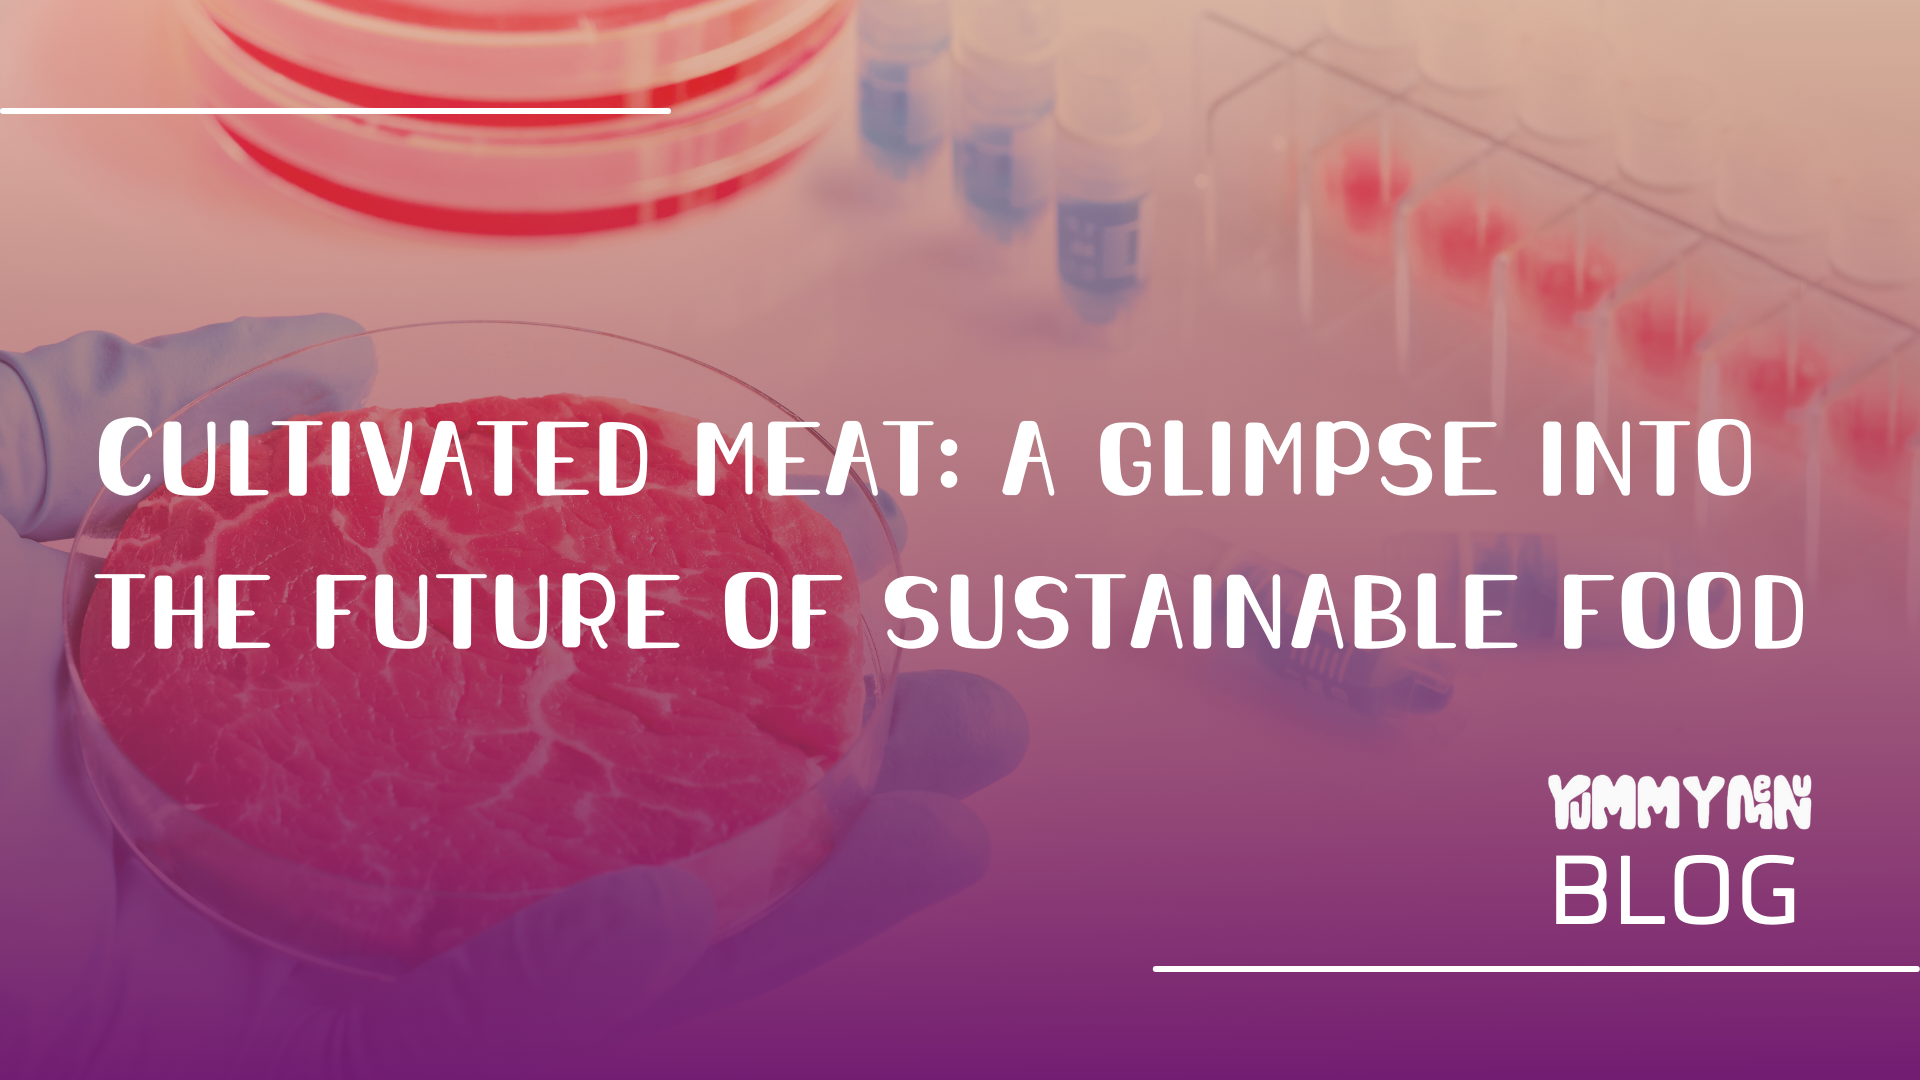 Cultivated Meat: A Glimpse into the Future of Sustainable Food